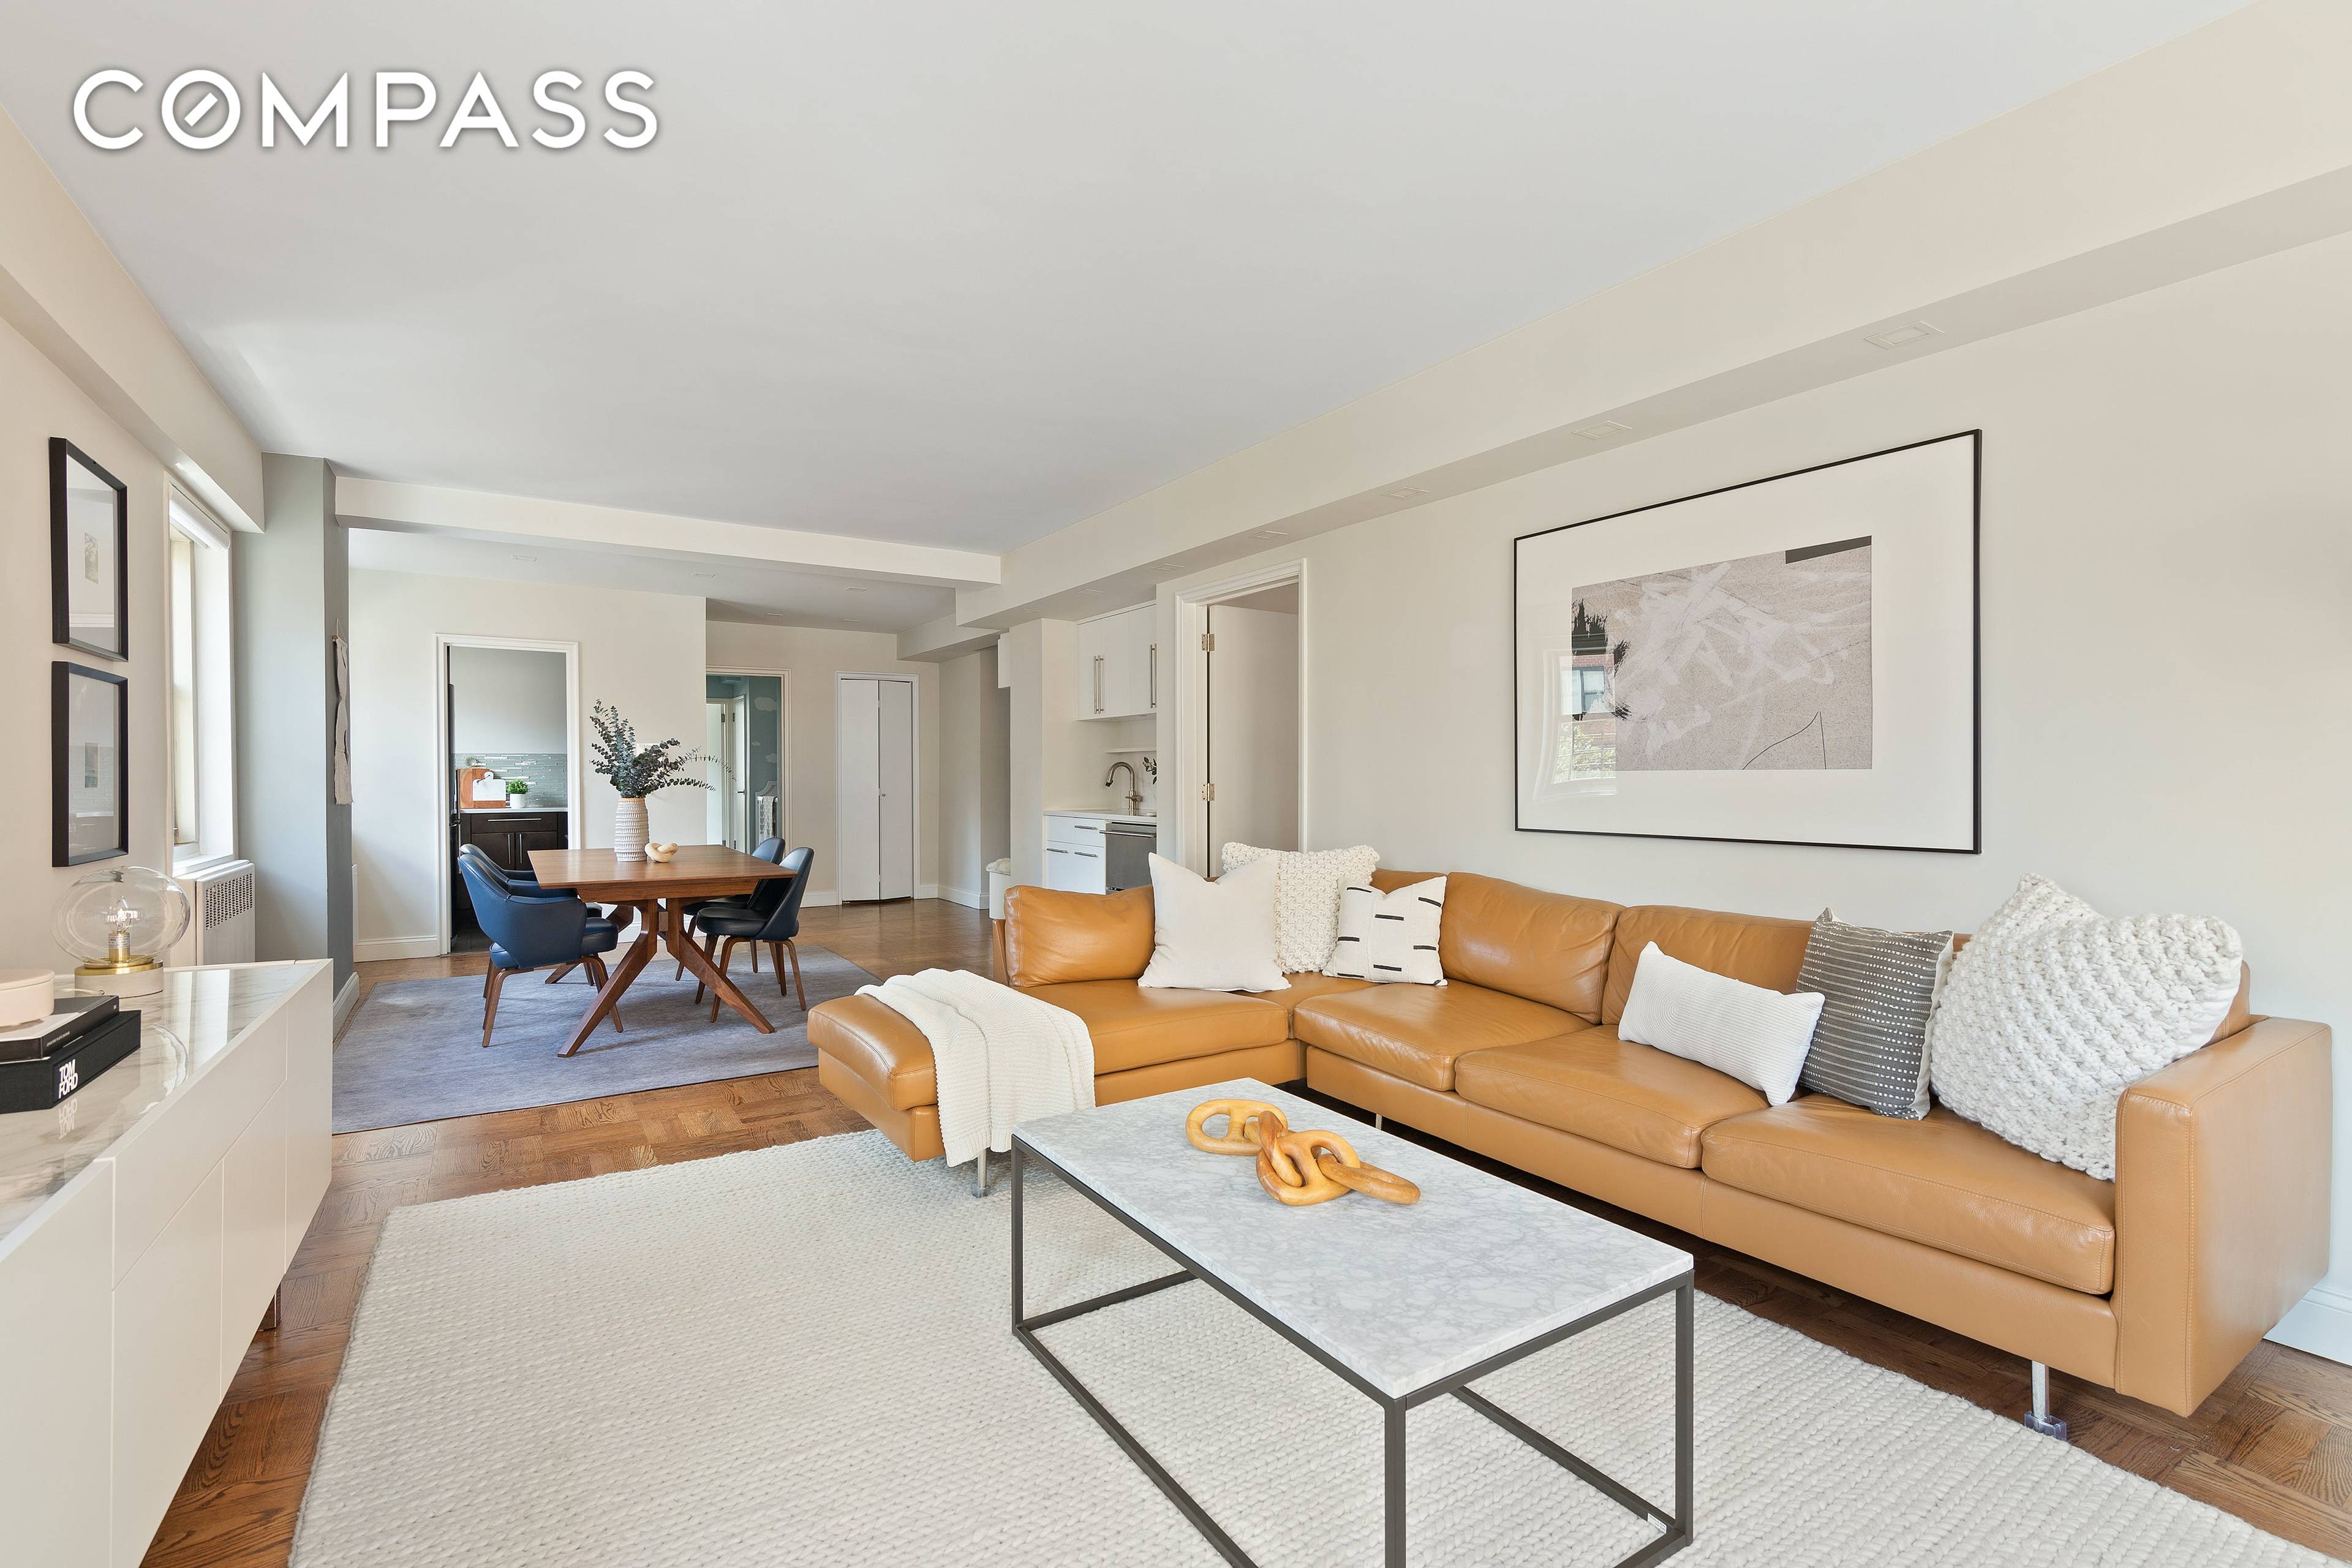 Sunny, Spacious, Renovated and Elegant describe this custom home at 35 Park Avenue.